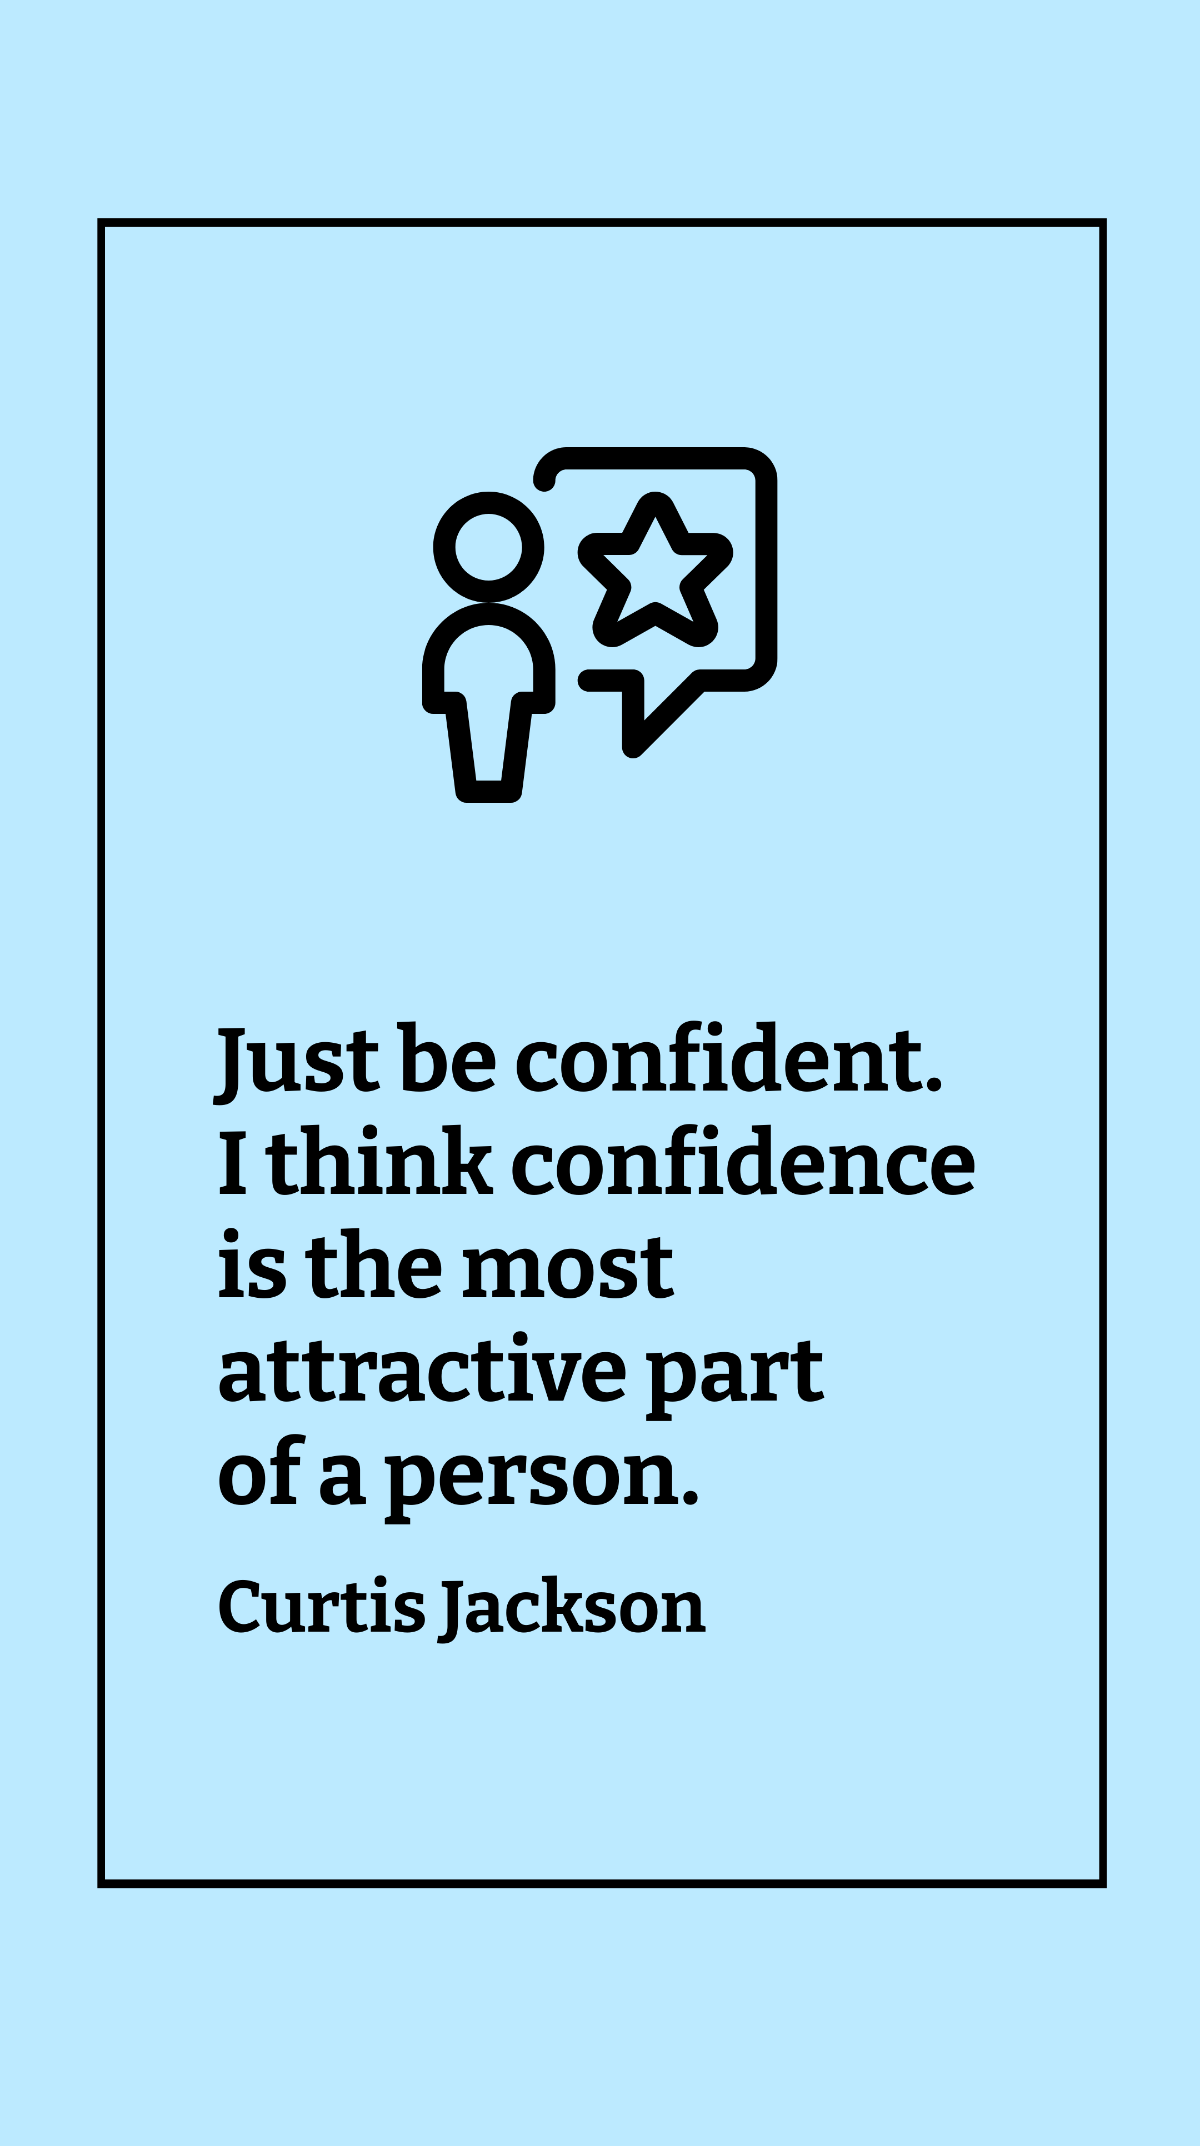 Curtis Jackson - Just be confident. I think confidence is the most attractive part of a person. Template